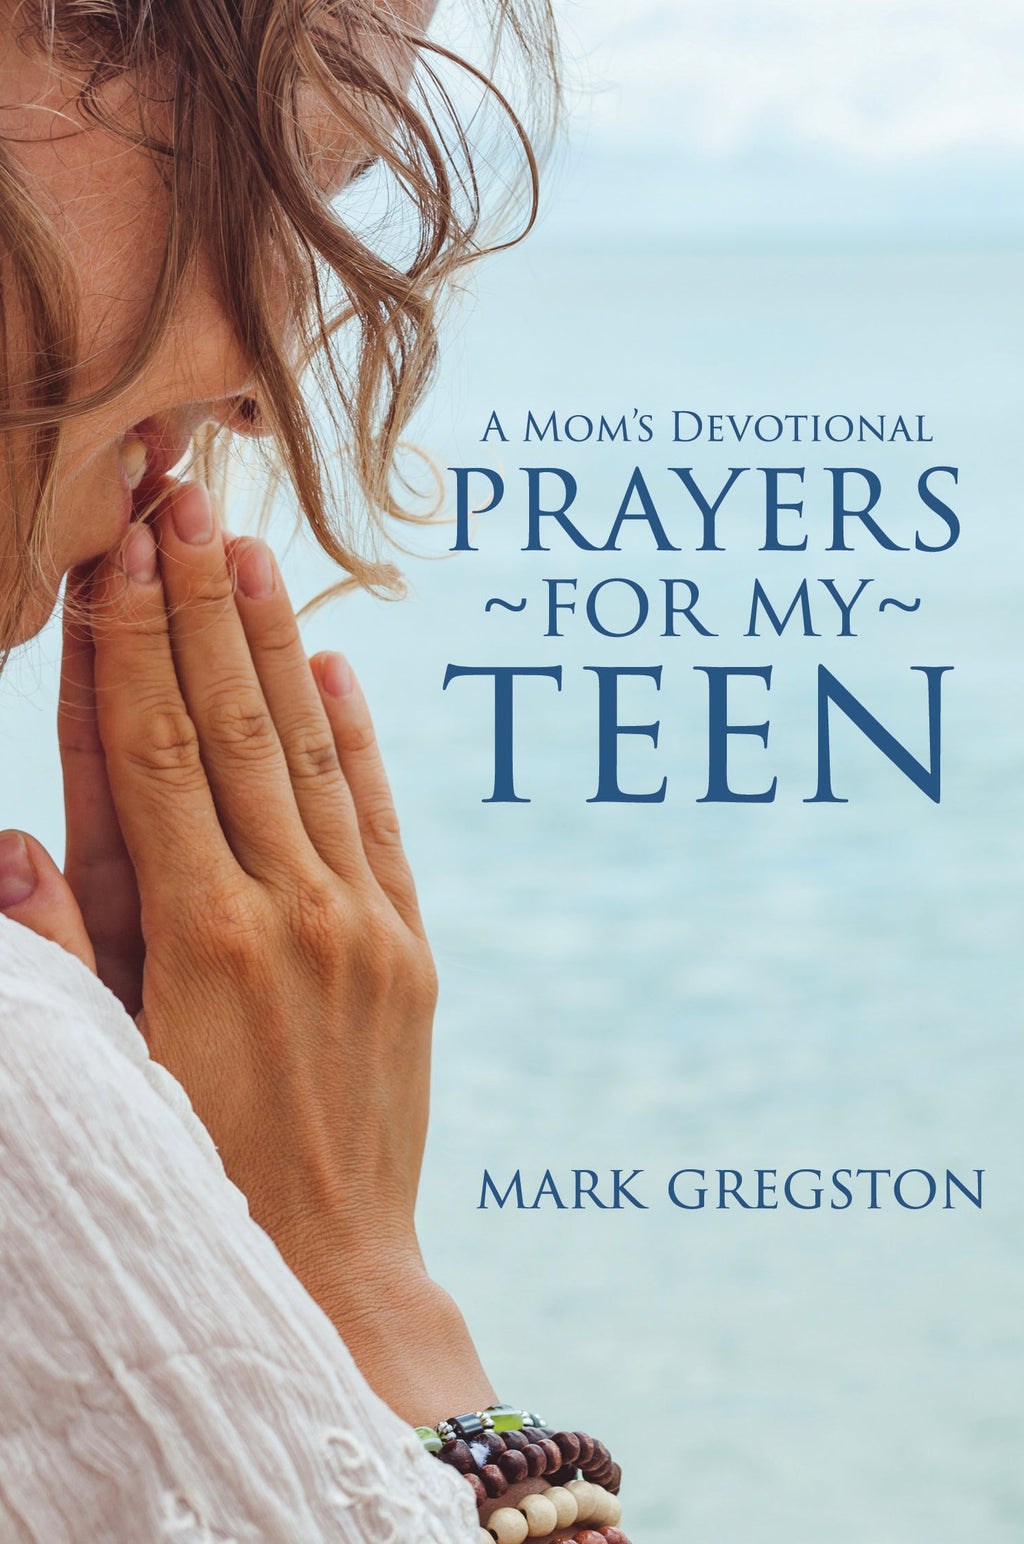 A Mom's Devotional: Prayers for My Teen